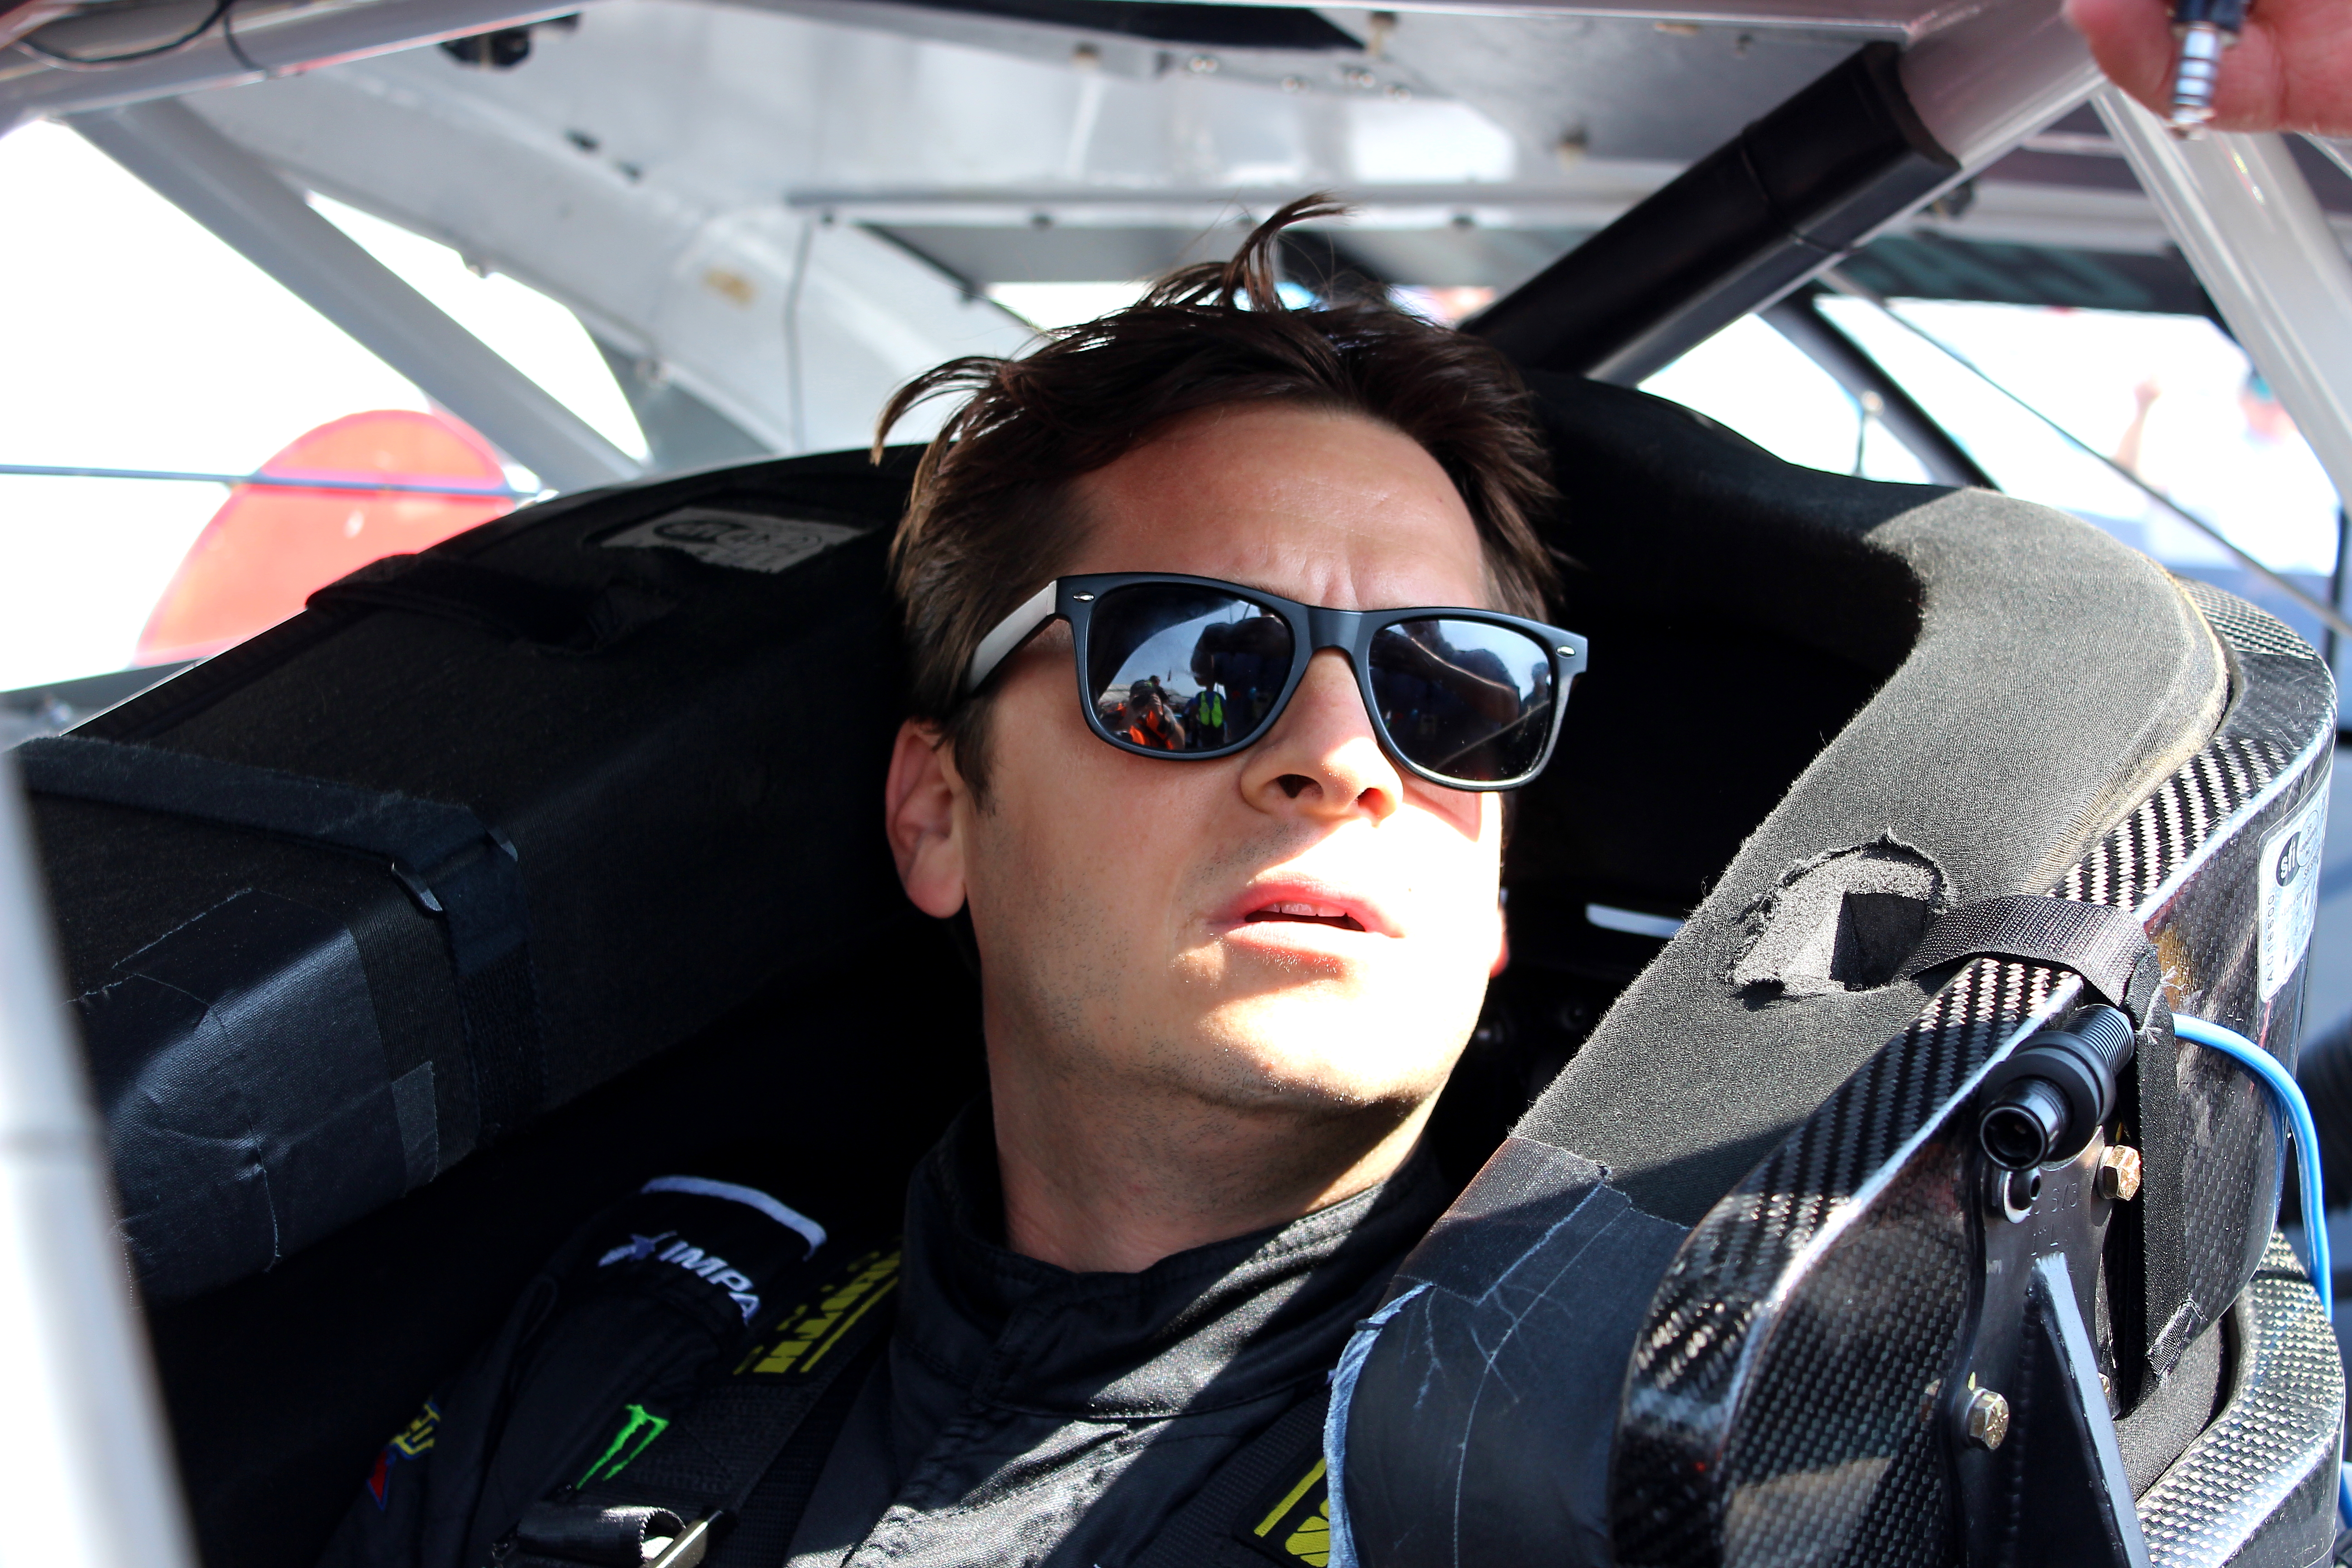 Certainly, Landon Cassill makes the most of his physical fitness for his racing efforts. (Photo Credit: Josh Jones/TPF)